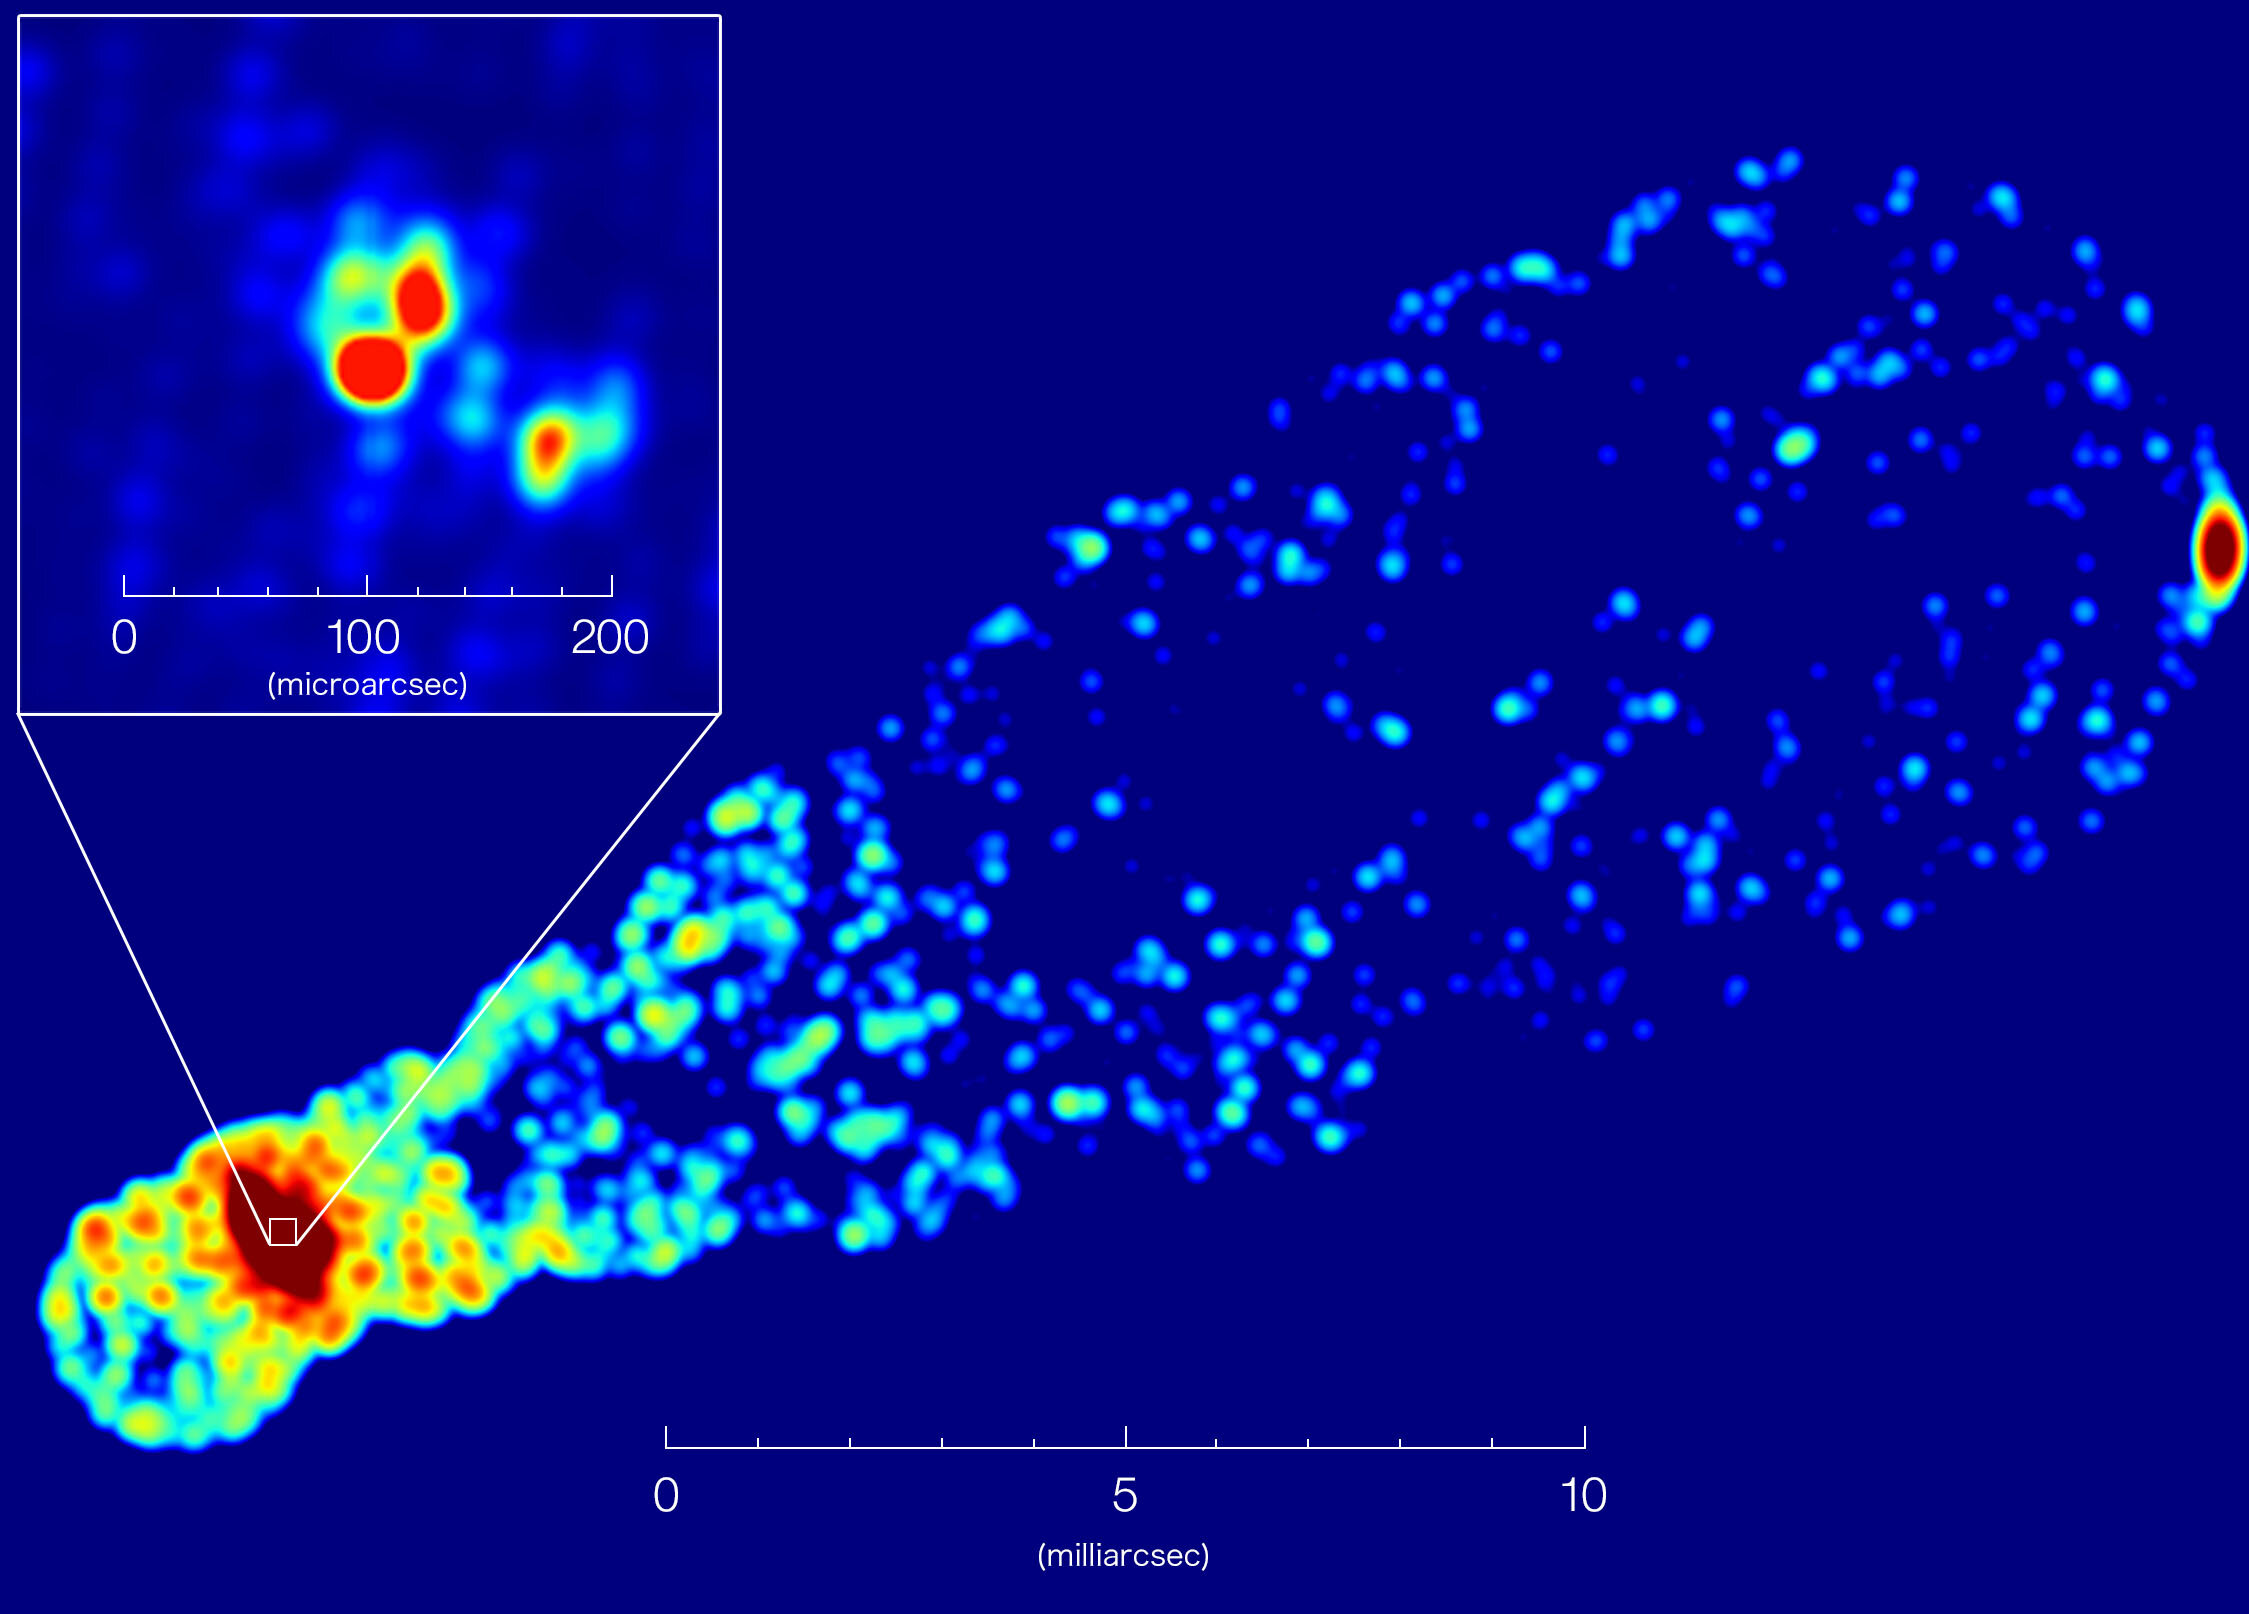 Independent reanalysis of the M87 galactic center radio observational data